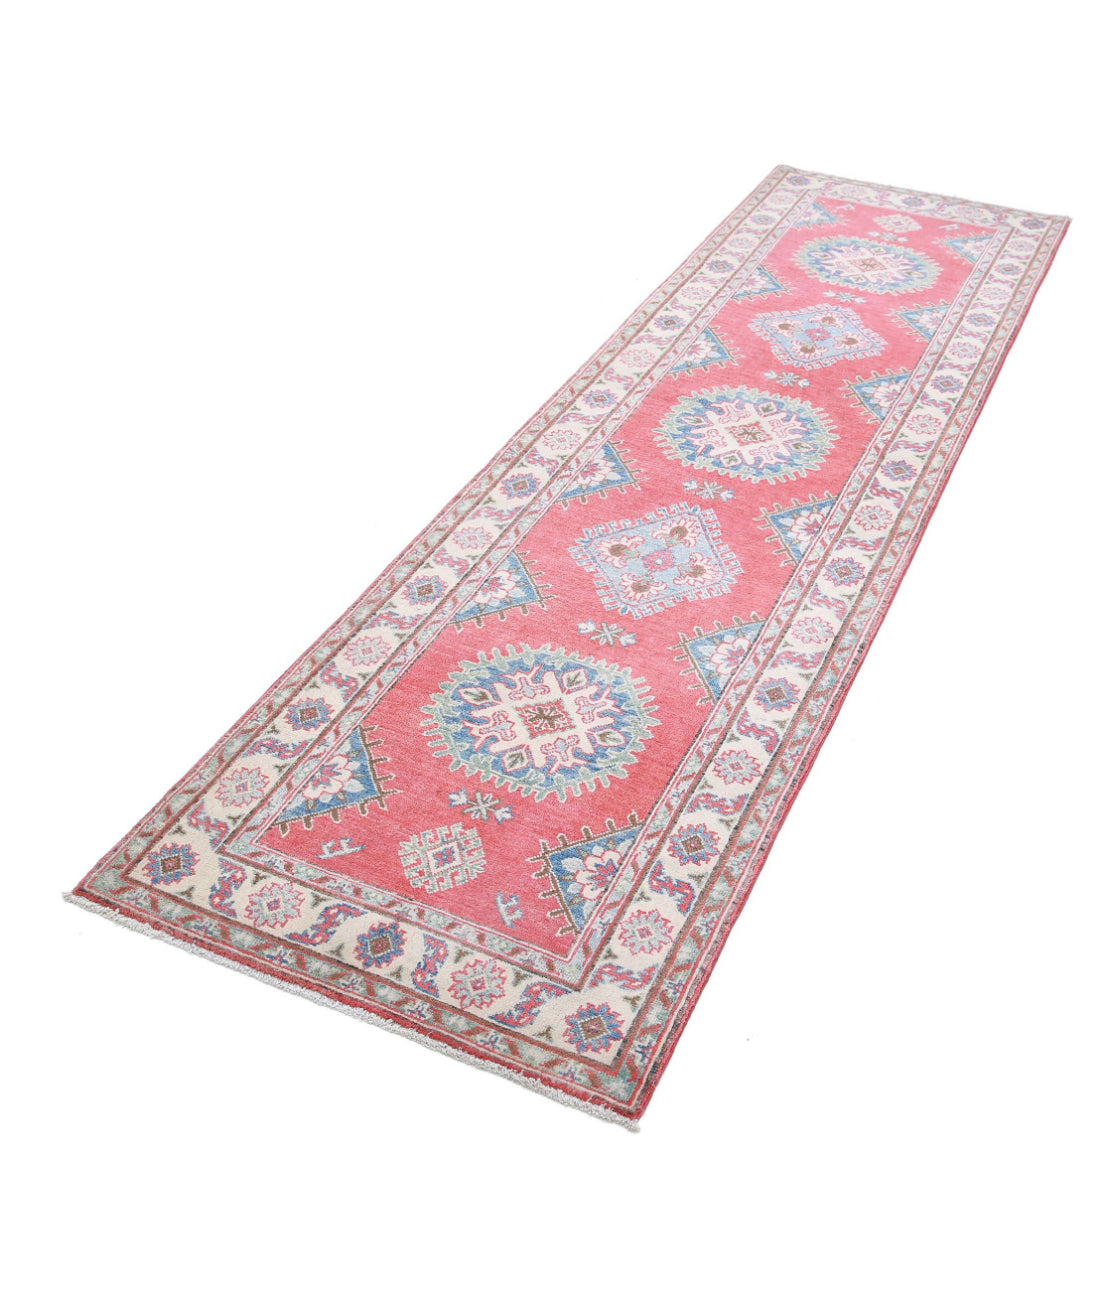 Hand Knotted Tribal Kazak Wool Rug - 2'7'' x 9'7'' 2'7'' x 9'7'' (78 X 288) / Red / Ivory